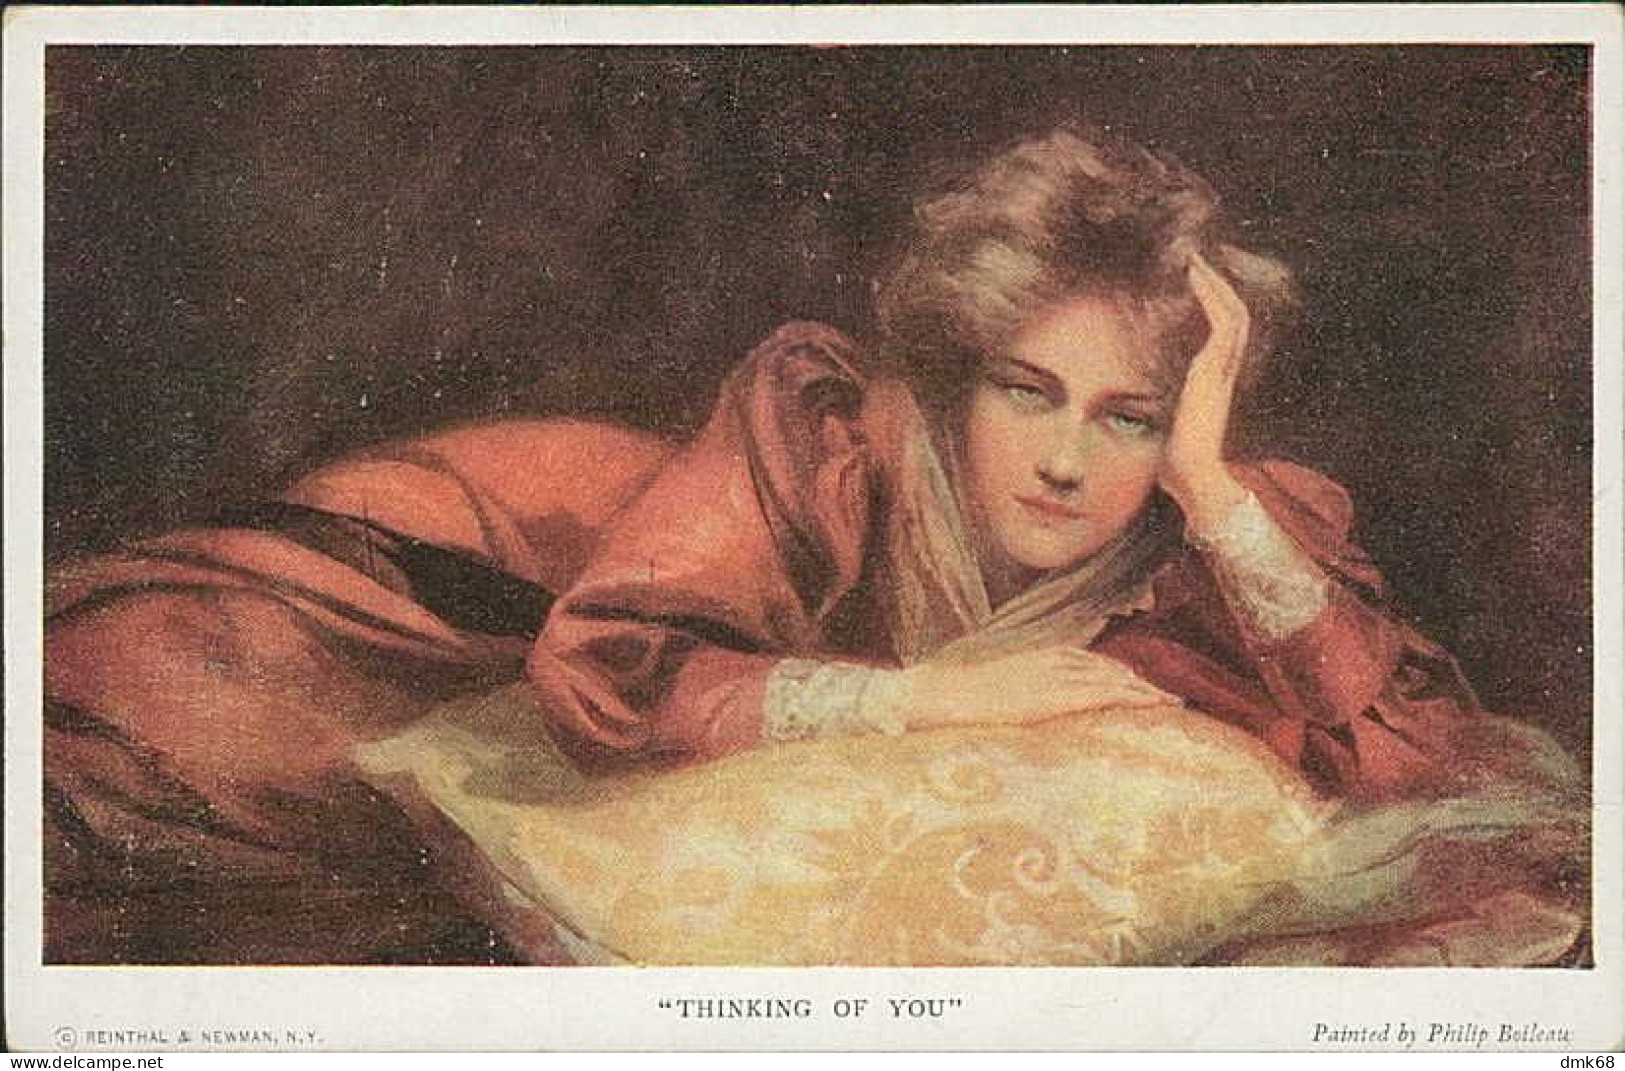 PHILIP BOILEAU SIGNED 1910s POSTCARD - WOMAN - THINKING OF YOU  - EDIT REINTHAL & NEWMAN N.2052 (5410) - Boileau, Philip